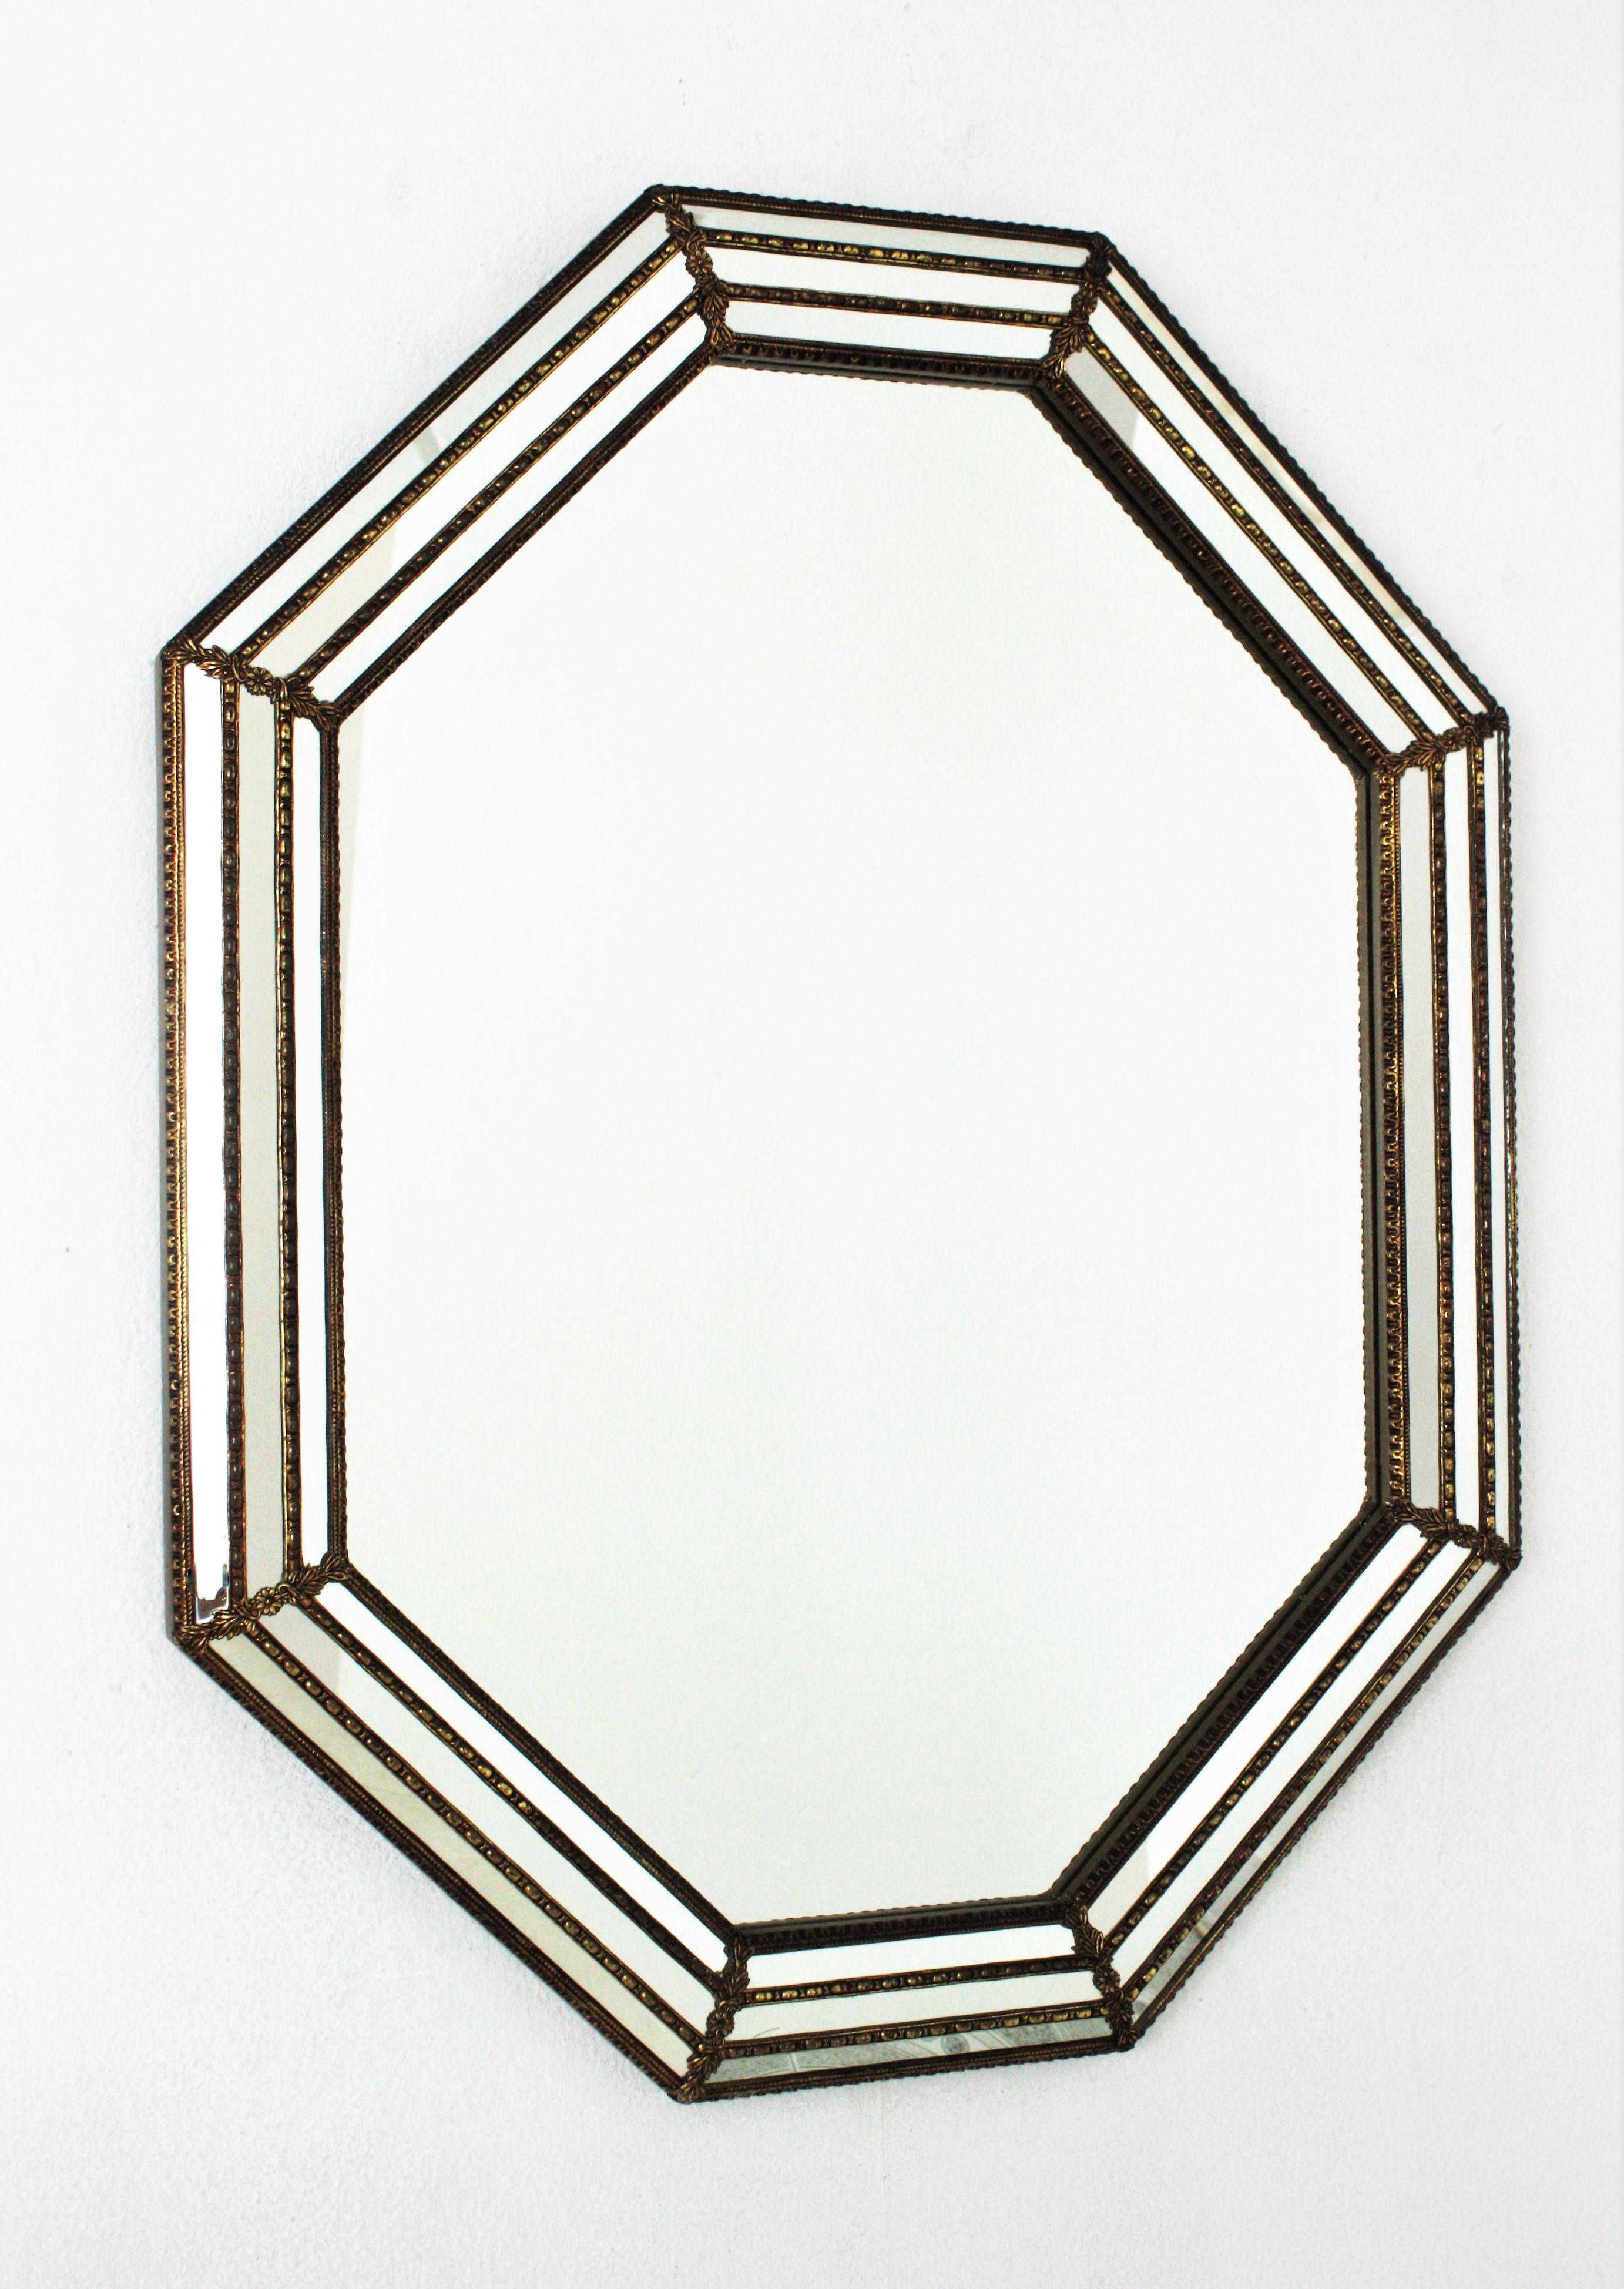 Venetian style octagonal wall mirror with gilt metal accents, Spain, 1950s
This octagonal mirror has a triple mirror frame. The mirrored panels are adorned by metal patterns and small flowers.
This wall mirror will be perfect in a contemporary or